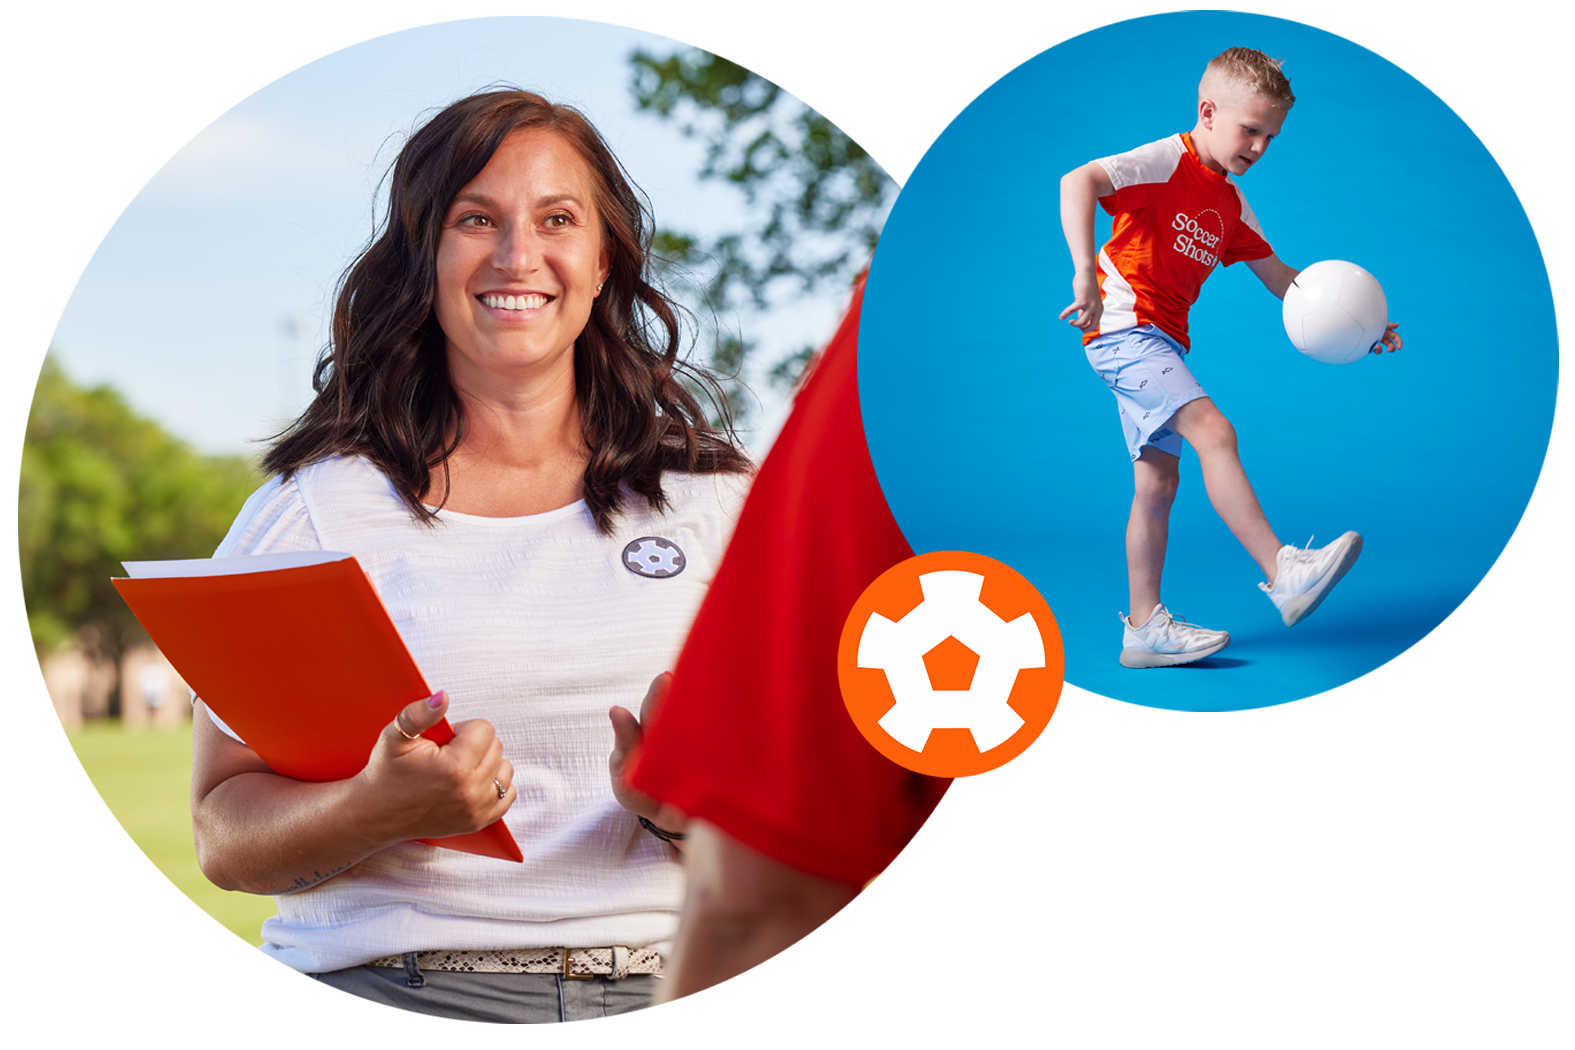 Franchisee talking to coach; Boy in Soccer Shots jersey juggling a soccer ball